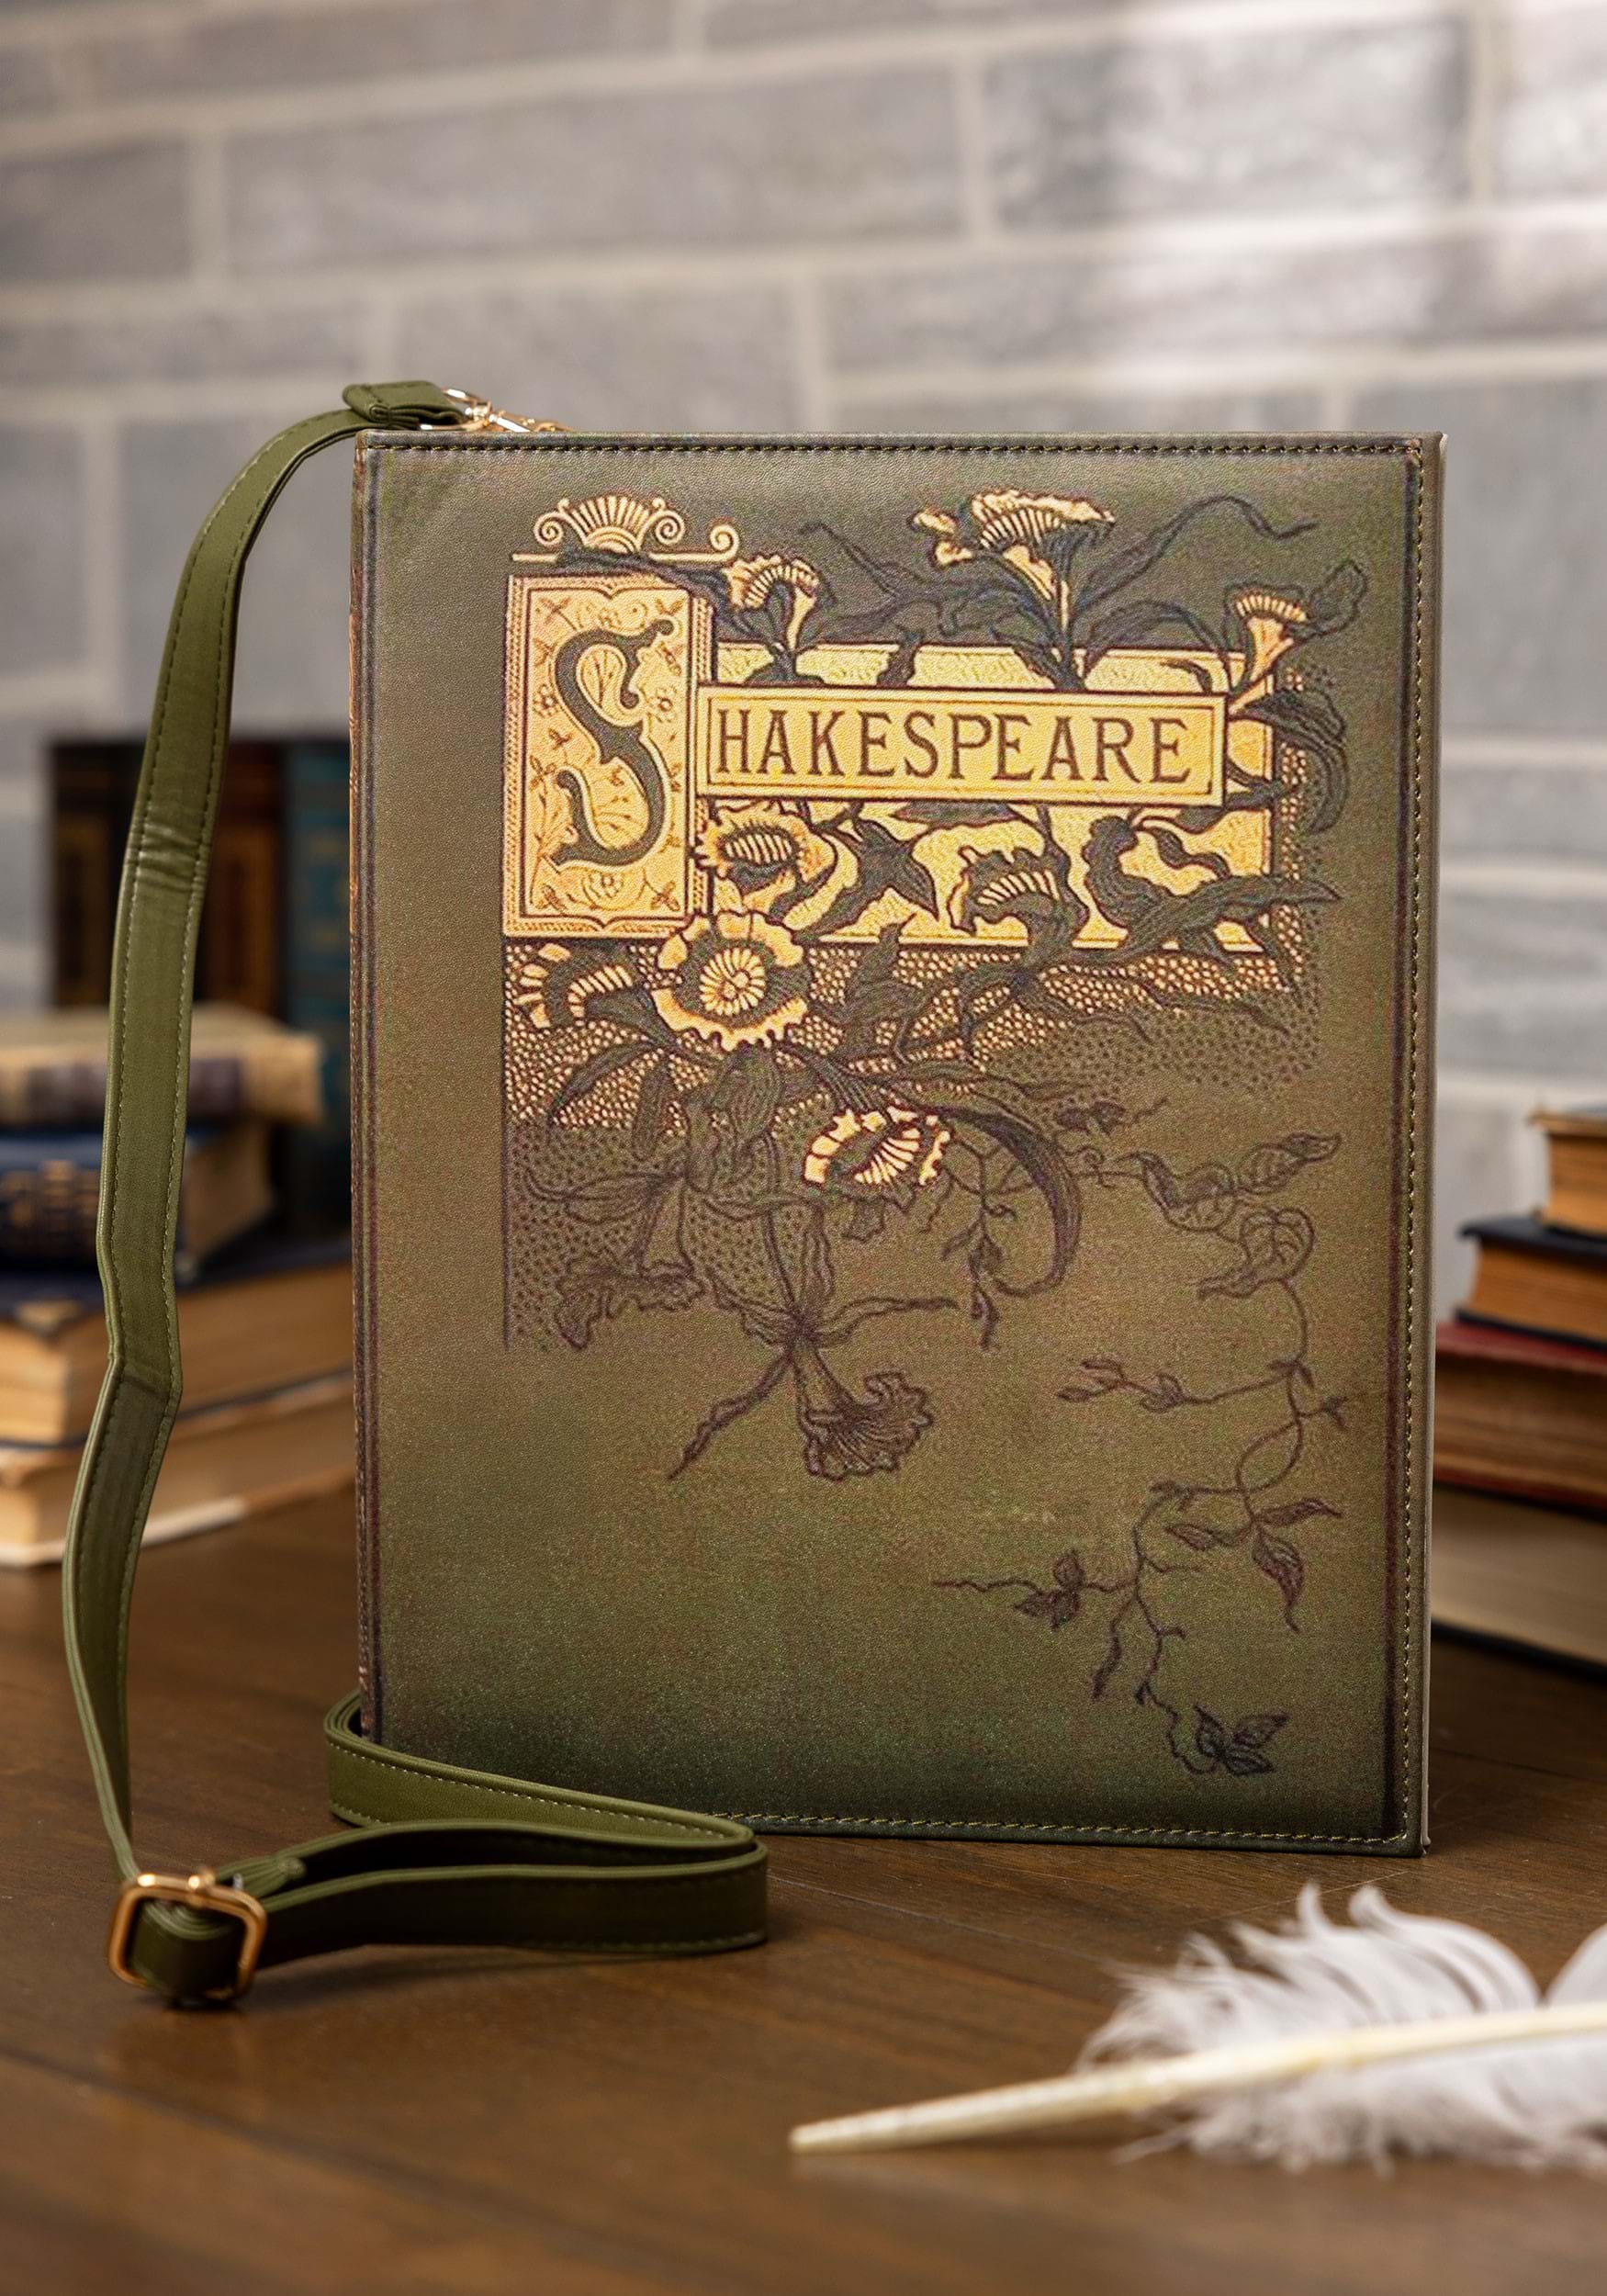 Shakespeare Book Costume Bag | Historical Accessories